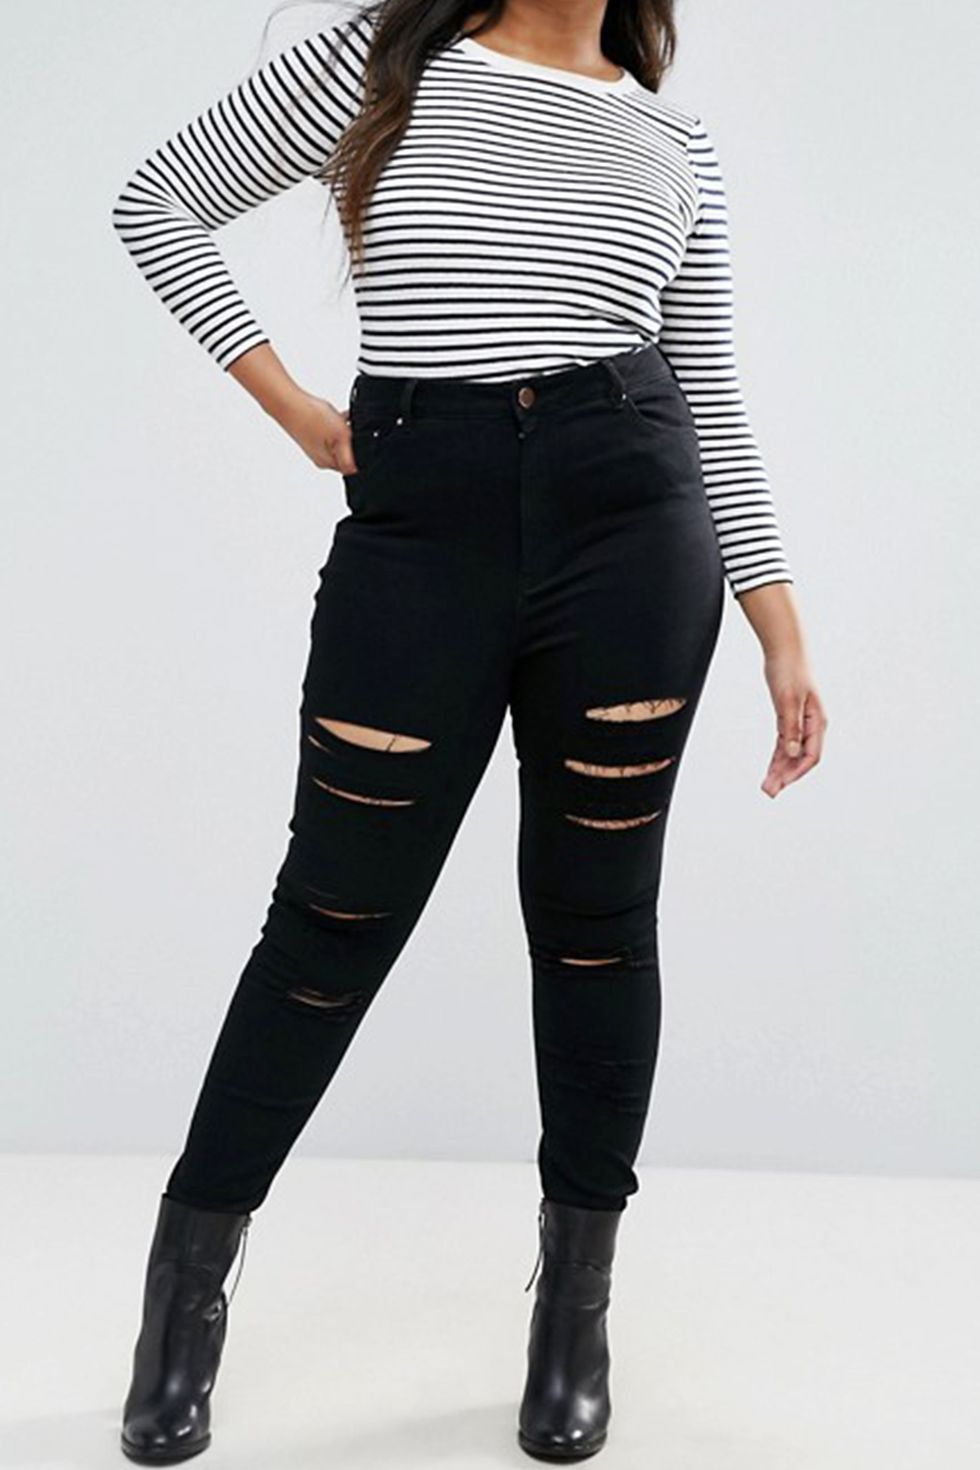 Cute Black Jean Outfit Ideas- 12 Refreshing Outfits That Rethink Your Old  Pair of Black Jeans